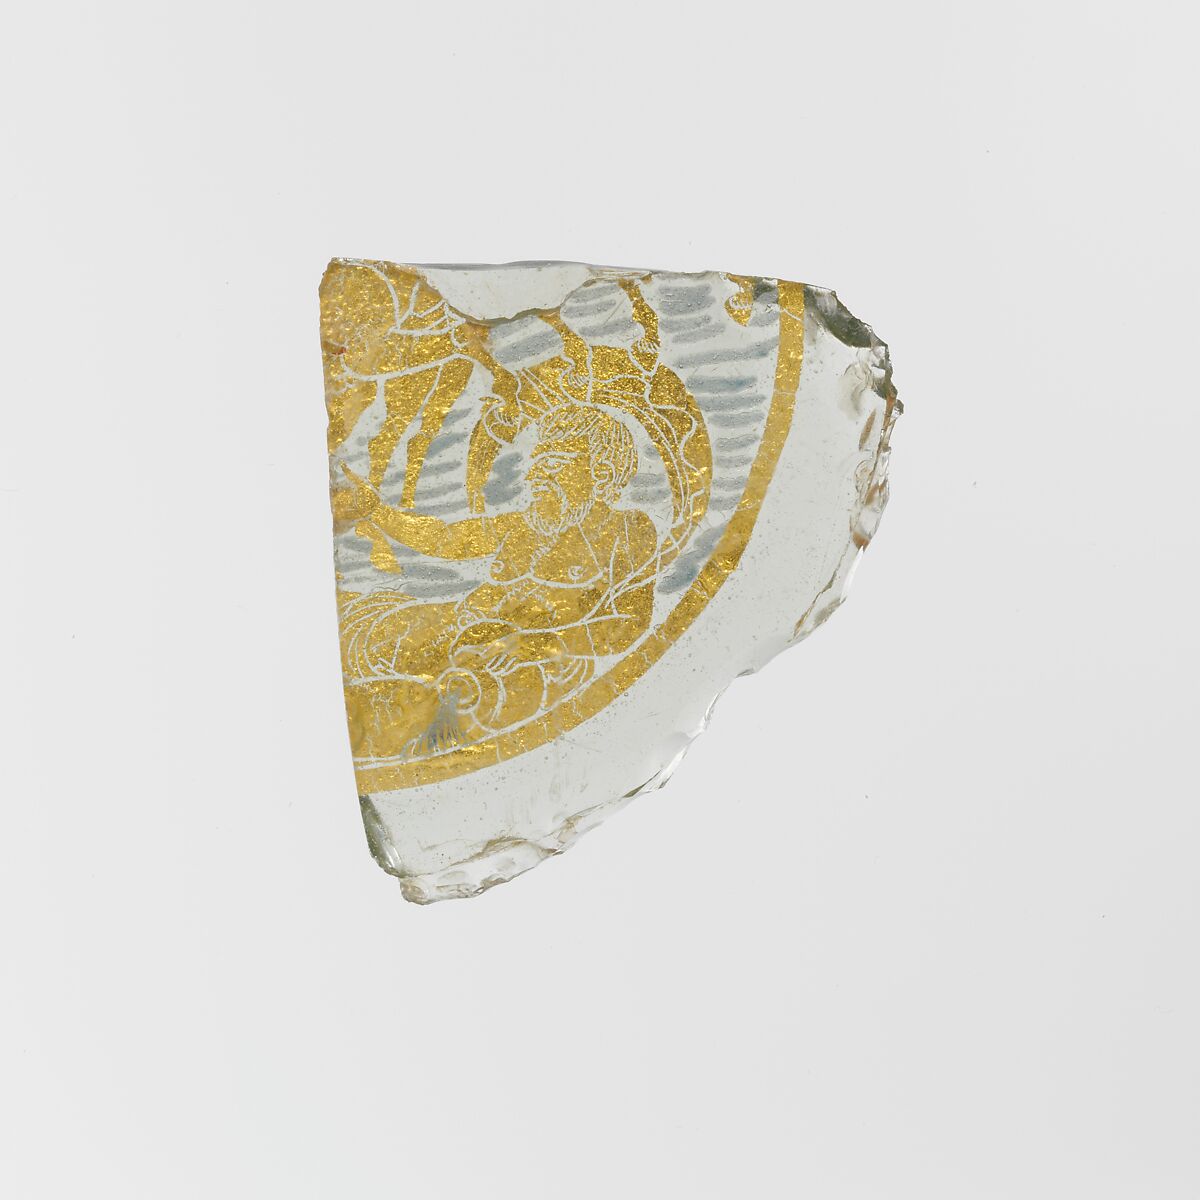 Glass bowl fragment with gold leaf and painted decoration, Glass, gold, paint, Roman 